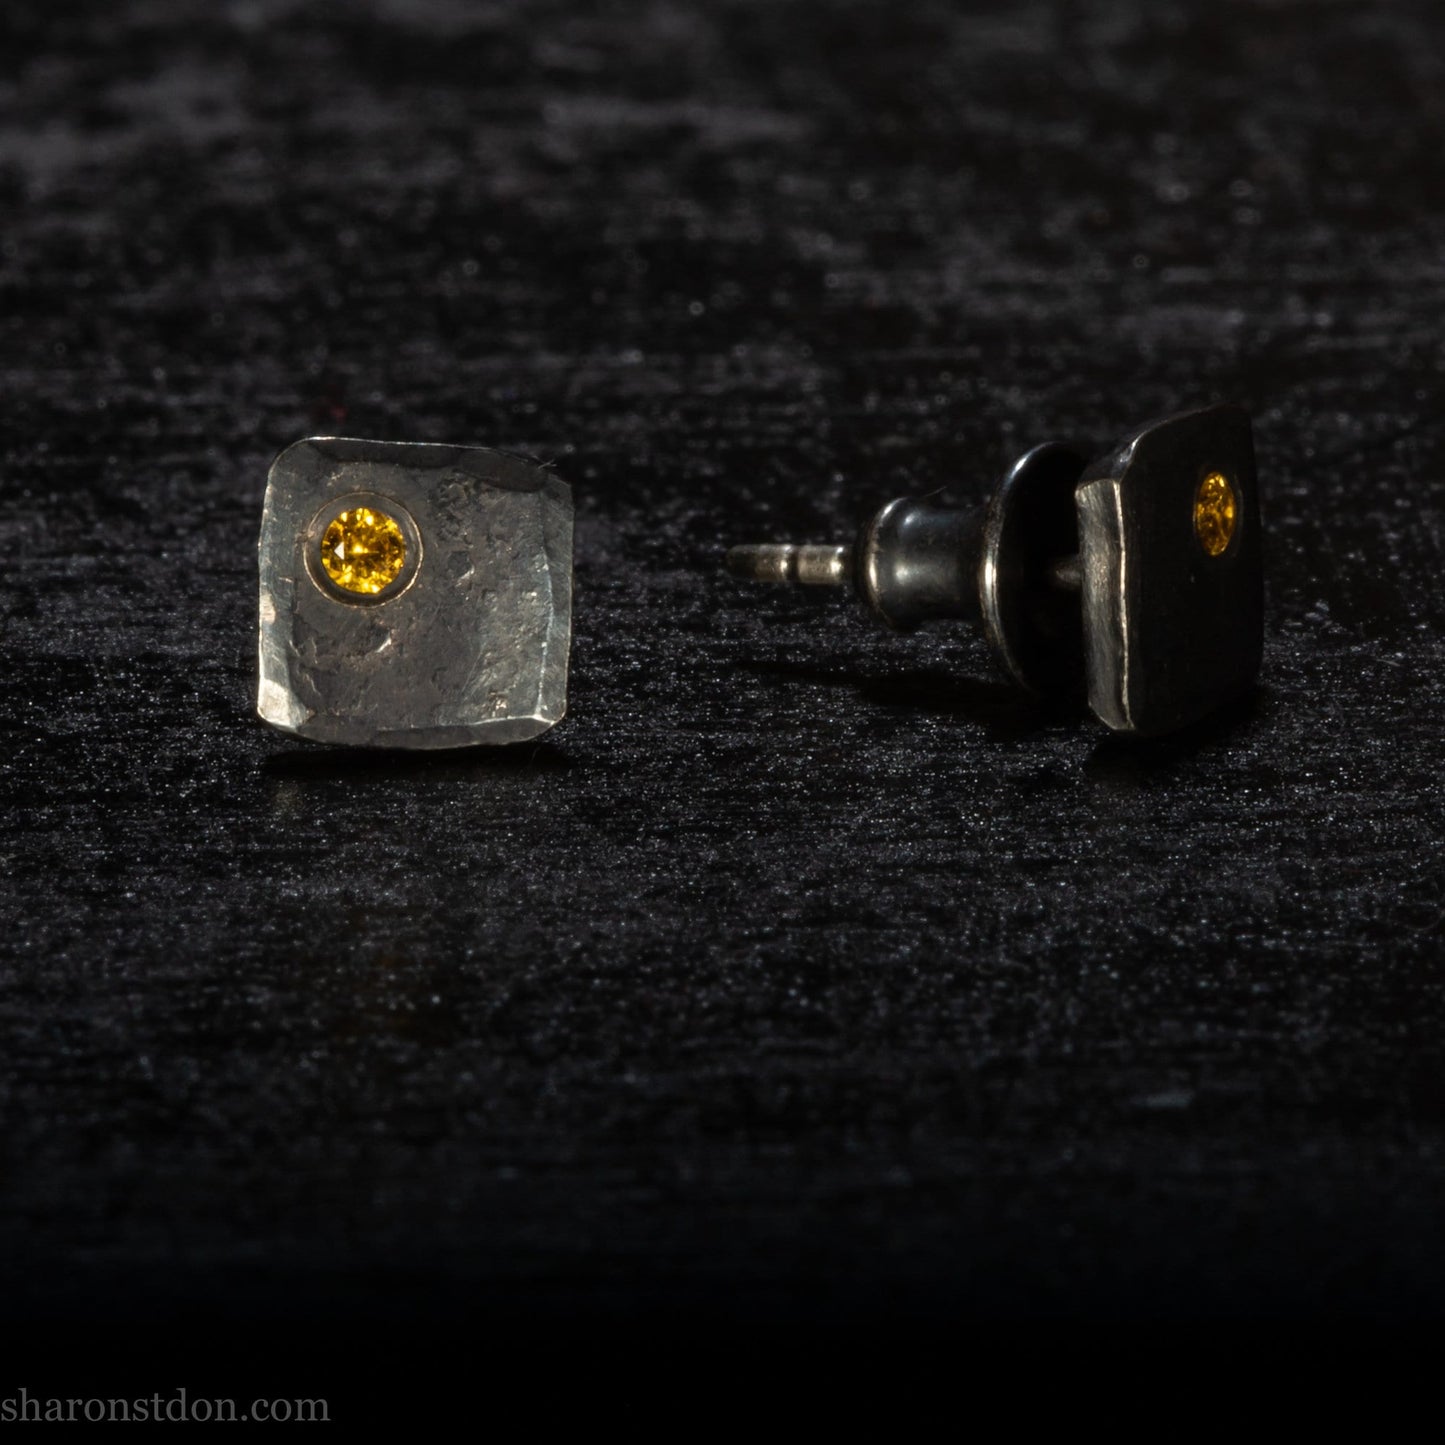 Handmade gemstone stud earrings. Oxidized black 925 sterling silver with canary yellow diamonds. Made by Sharon SaintDon in North America.